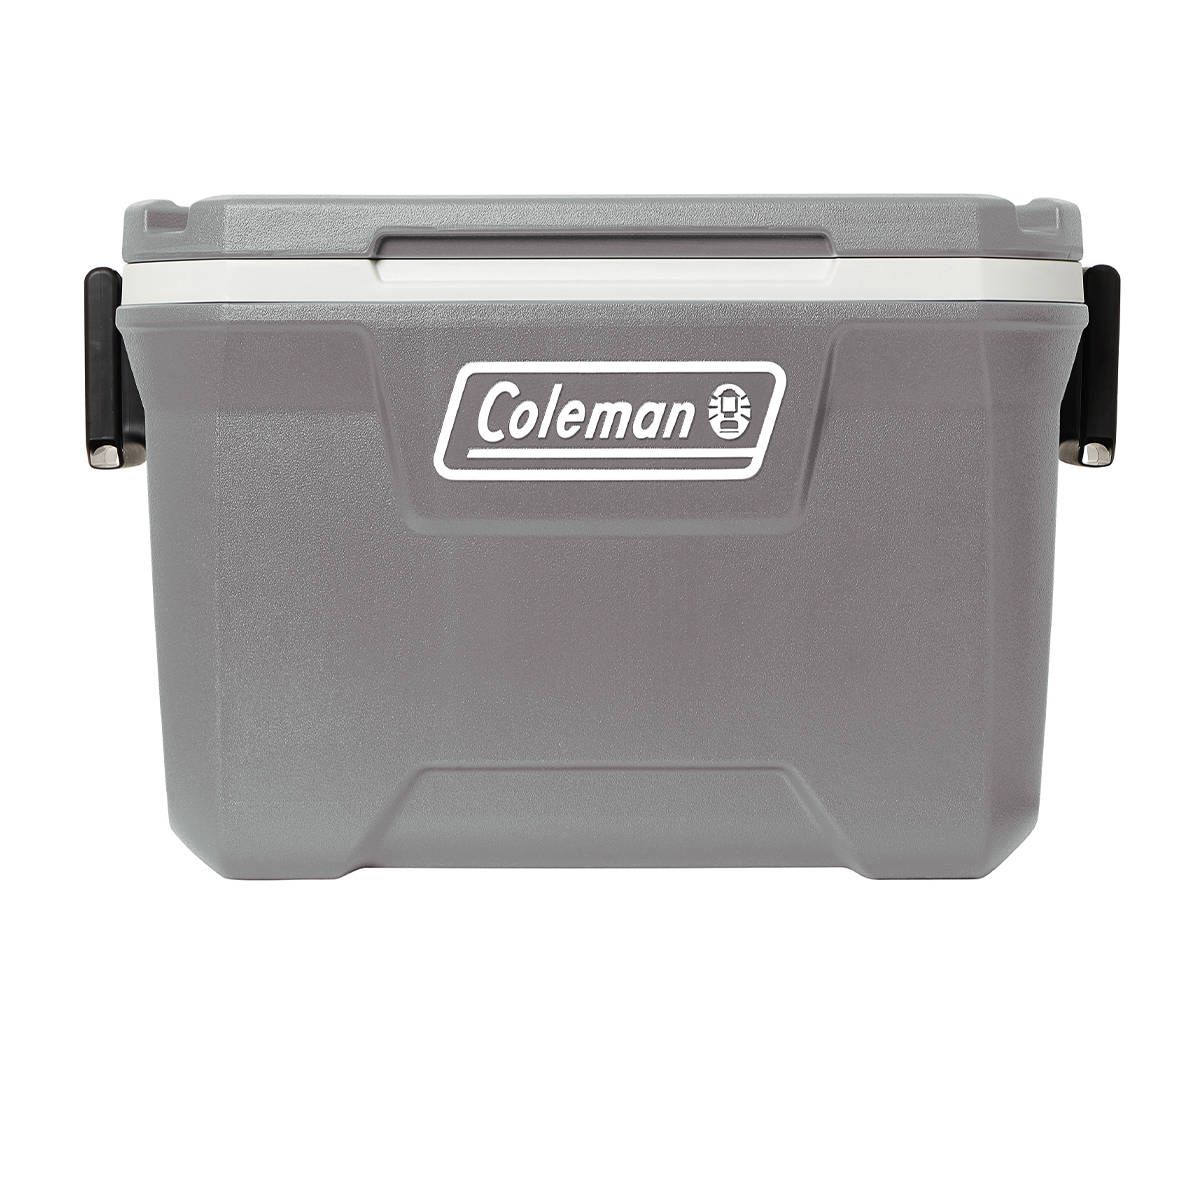 Conservadora Coleman 316 Series 52Qt,  image number null